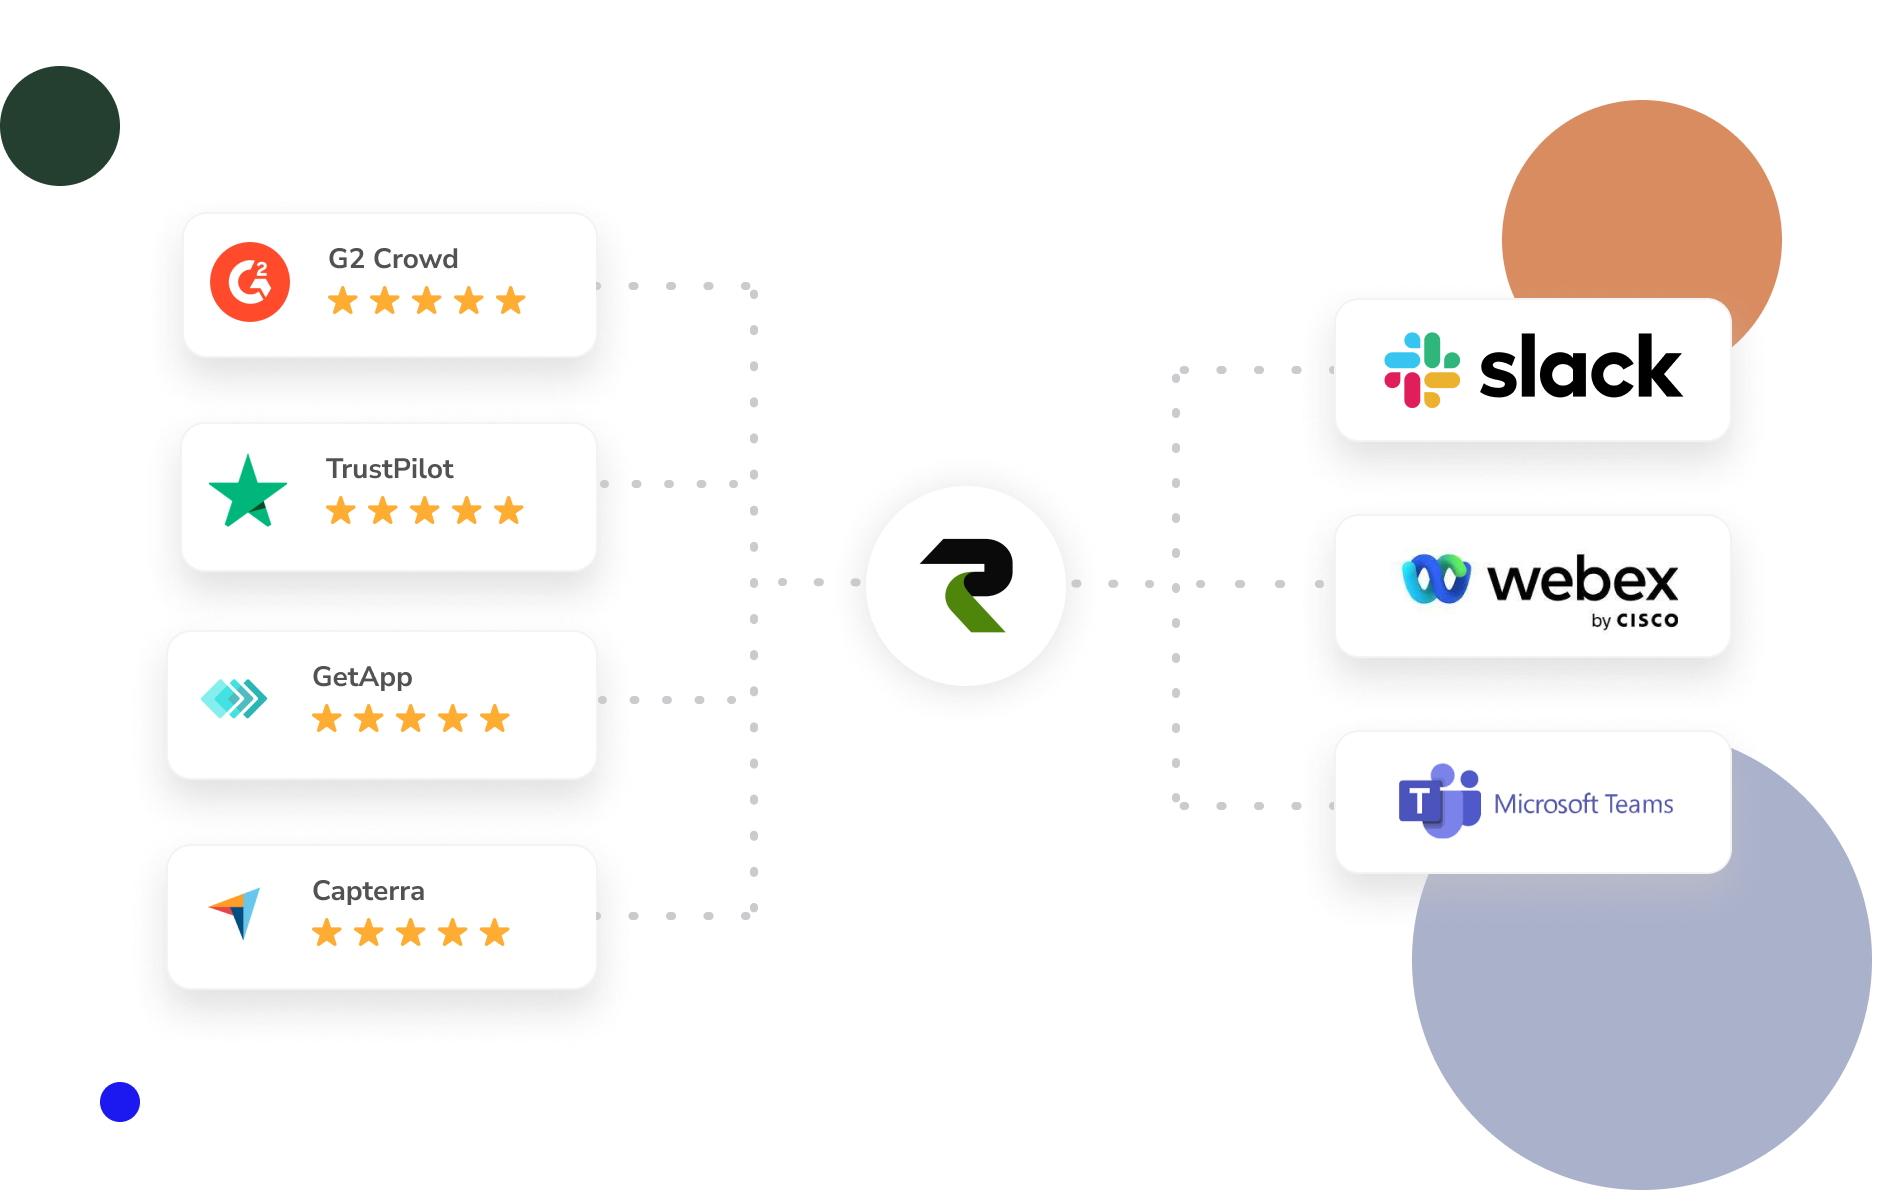 Send reviews into Microsoft Teams from any review site